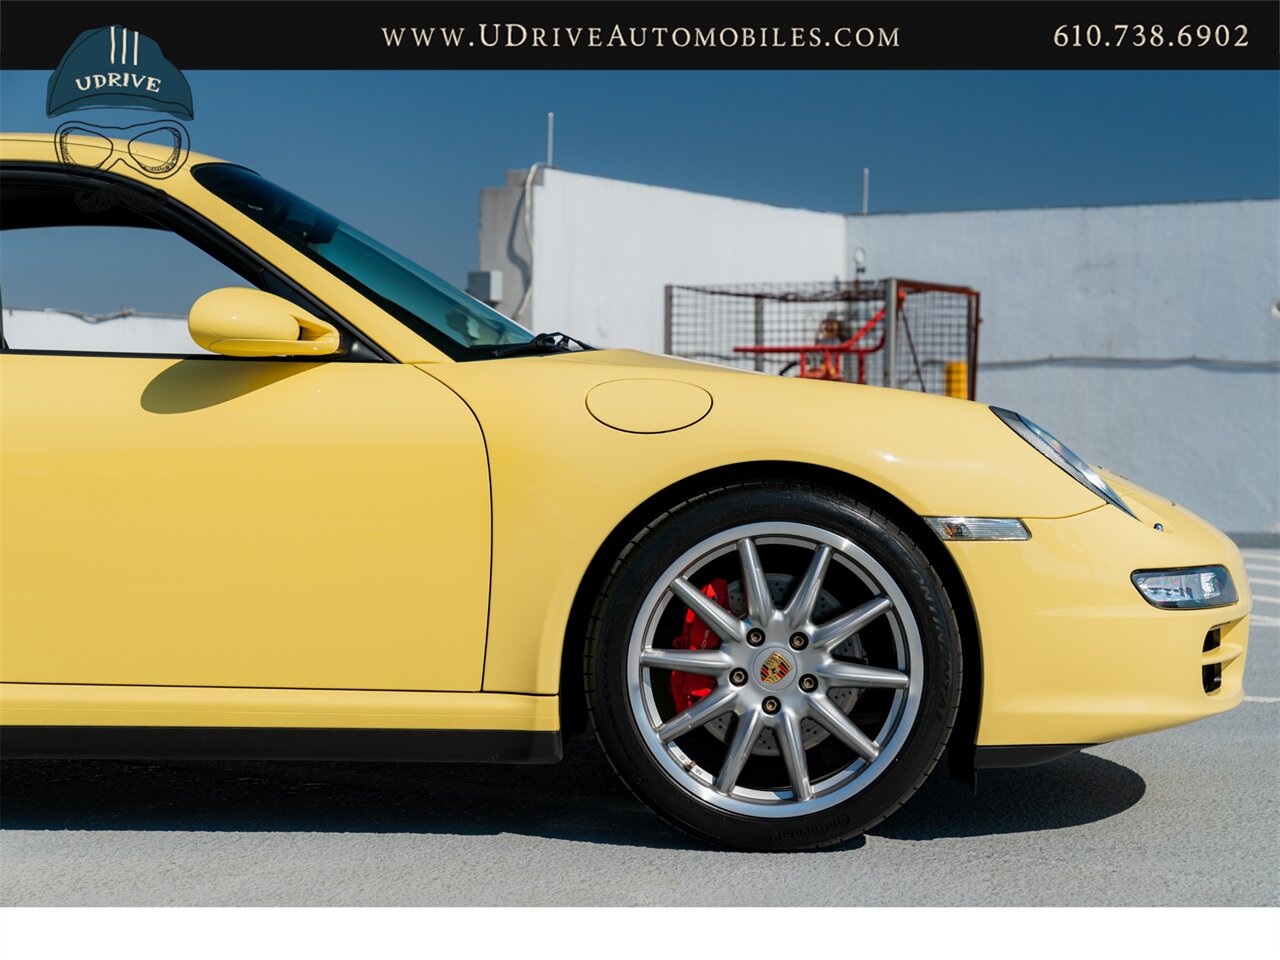 2007 Porsche 911 Carrera 4S 997 C4S Paint To Sample Pastel Yellow  6 Speed Sport Chrono Full Leather Yellow Gauges - Photo 15 - West Chester, PA 19382